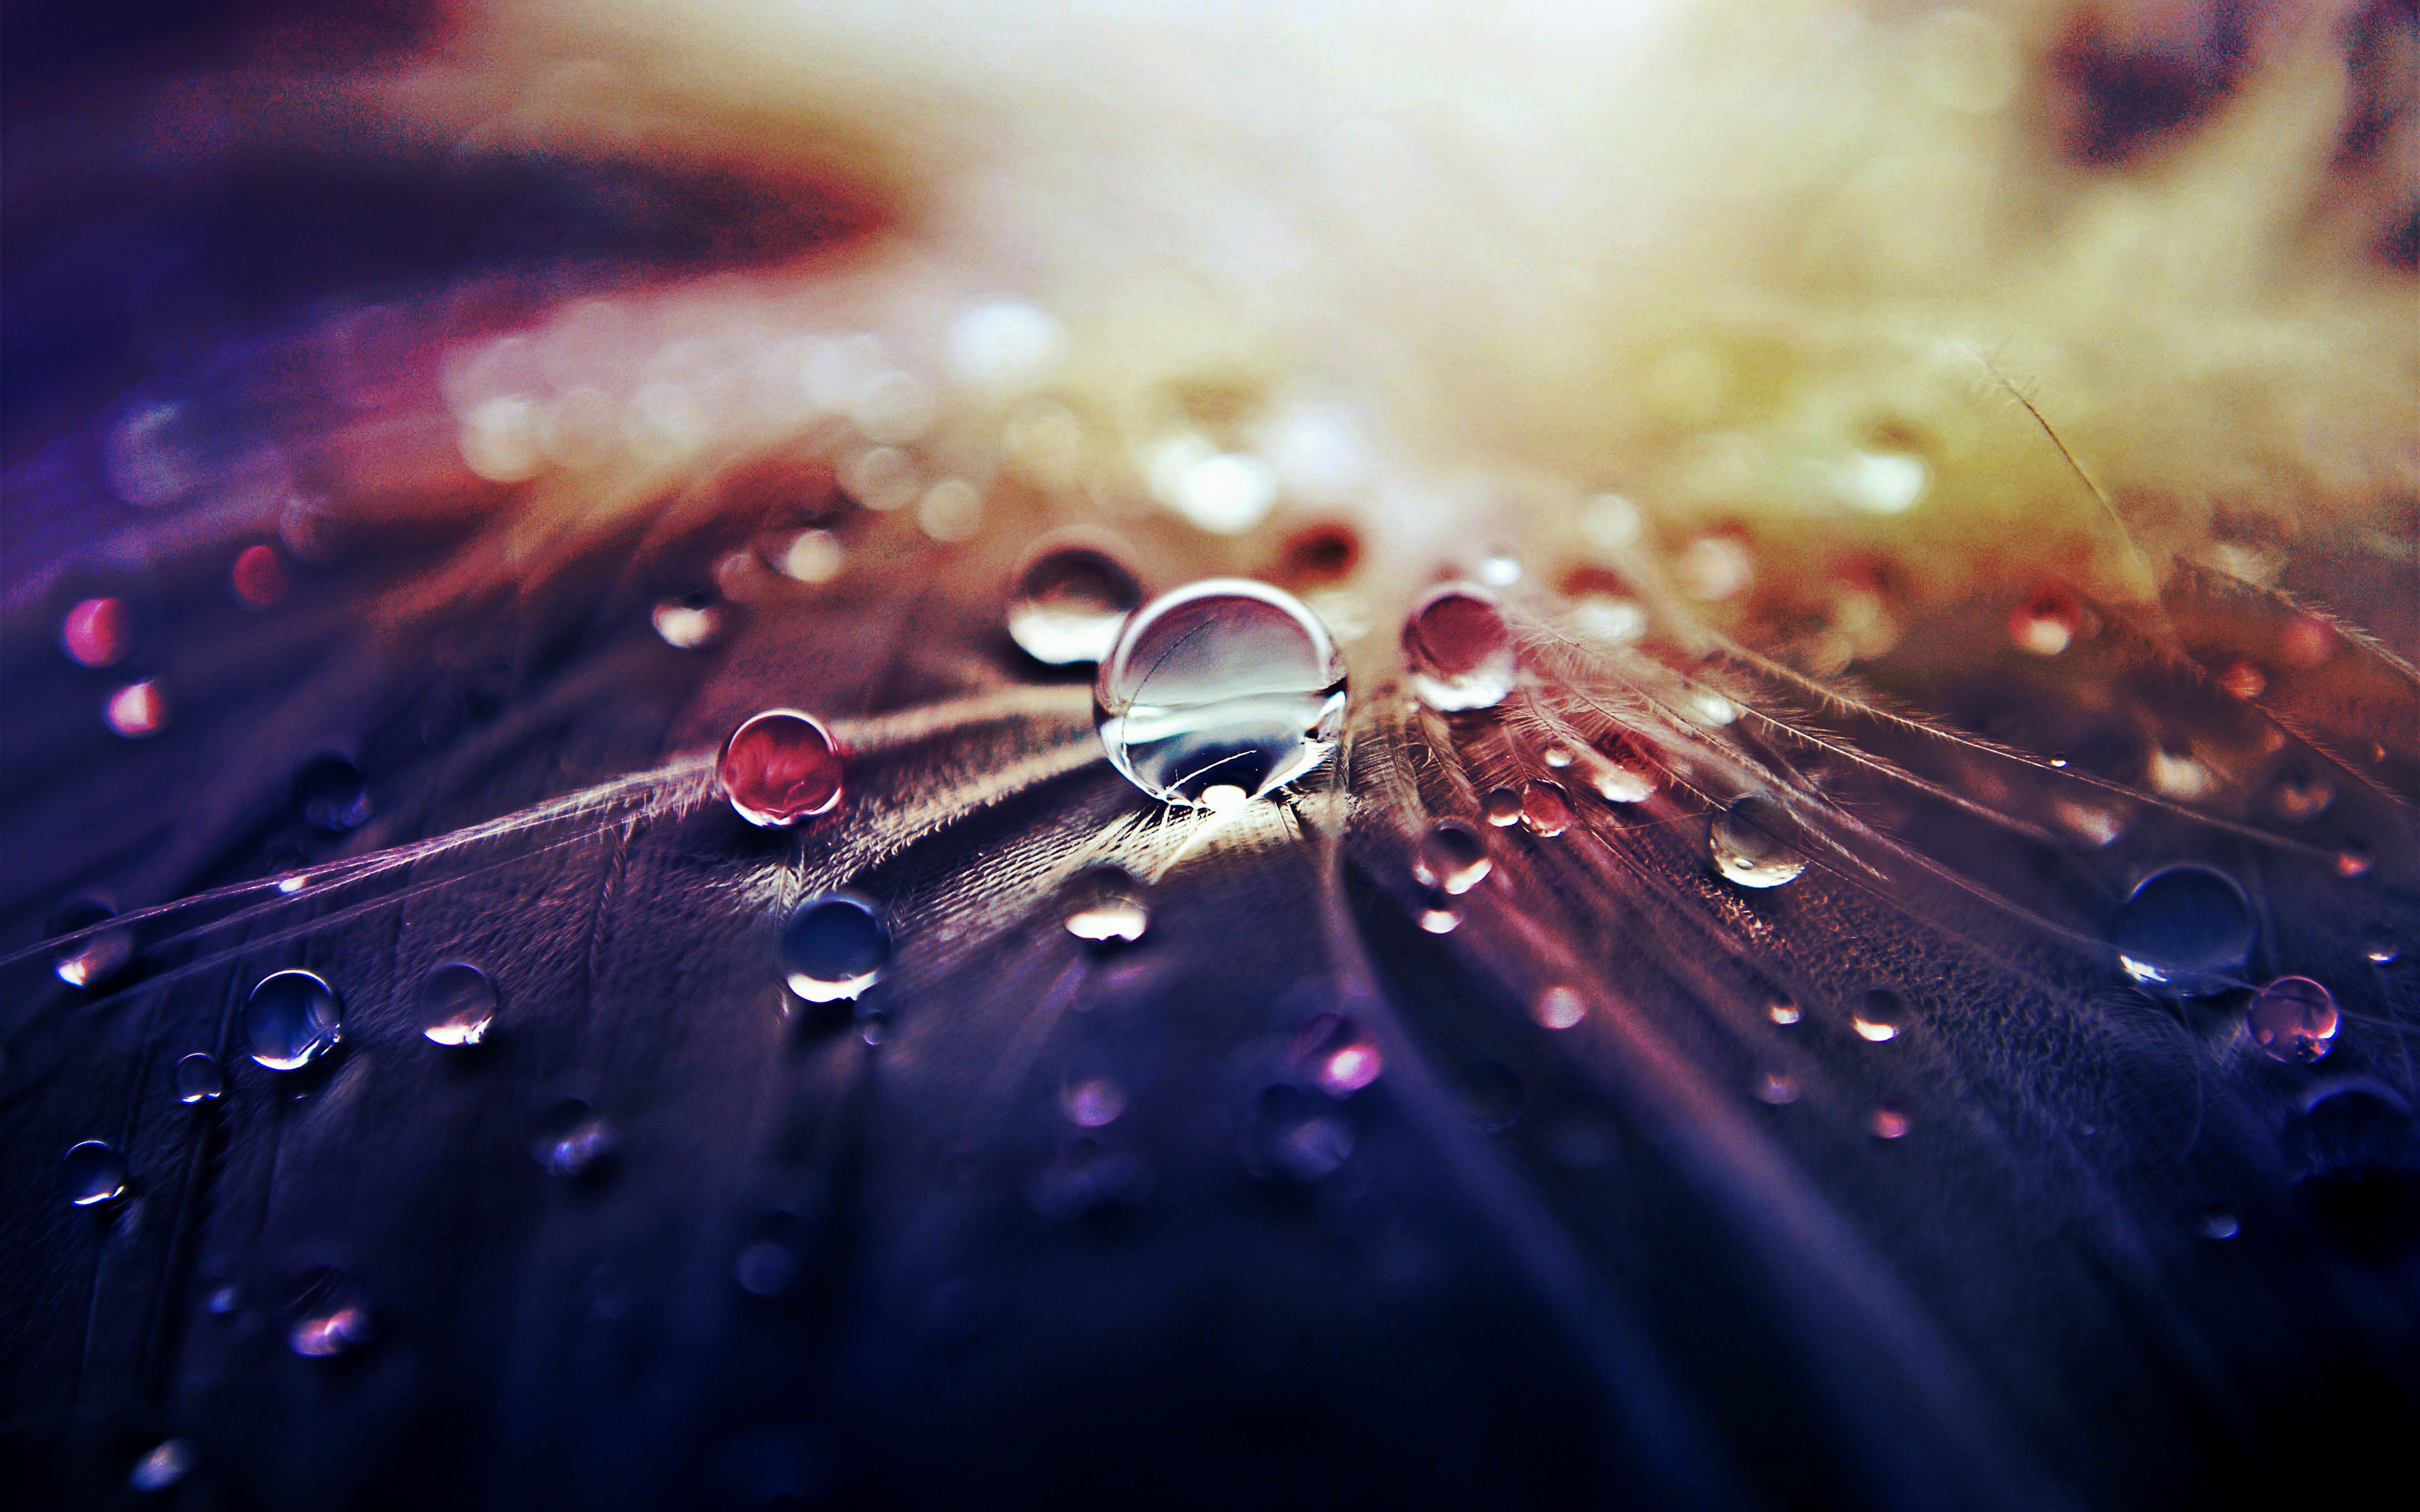 Hd Wallpapers Of Water Drops